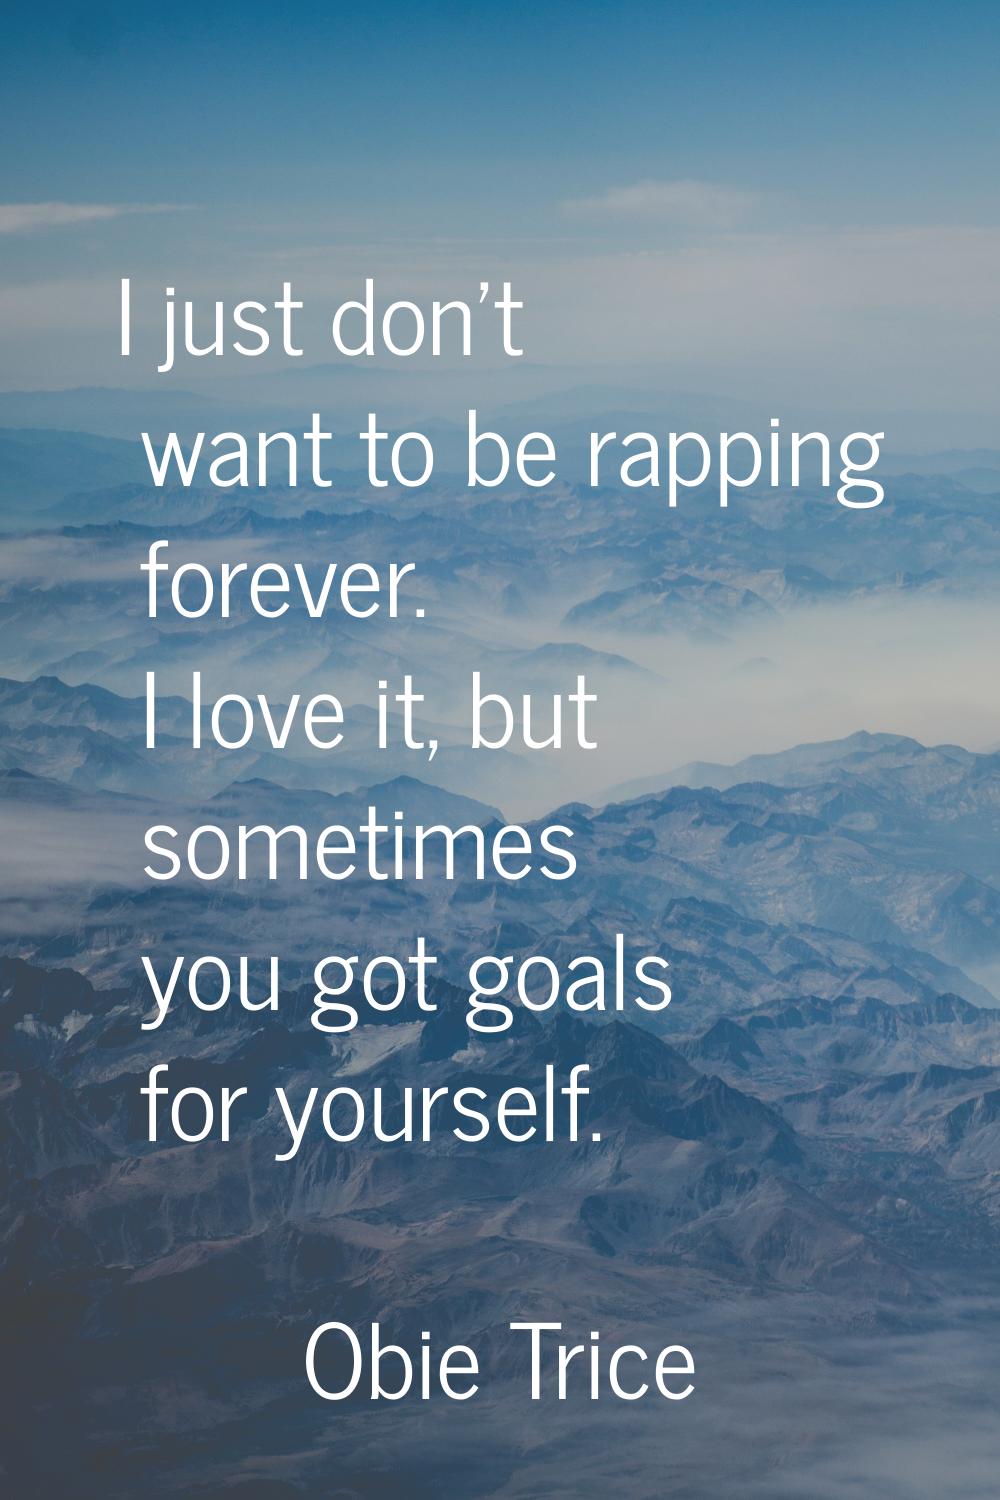 I just don't want to be rapping forever. I love it, but sometimes you got goals for yourself.